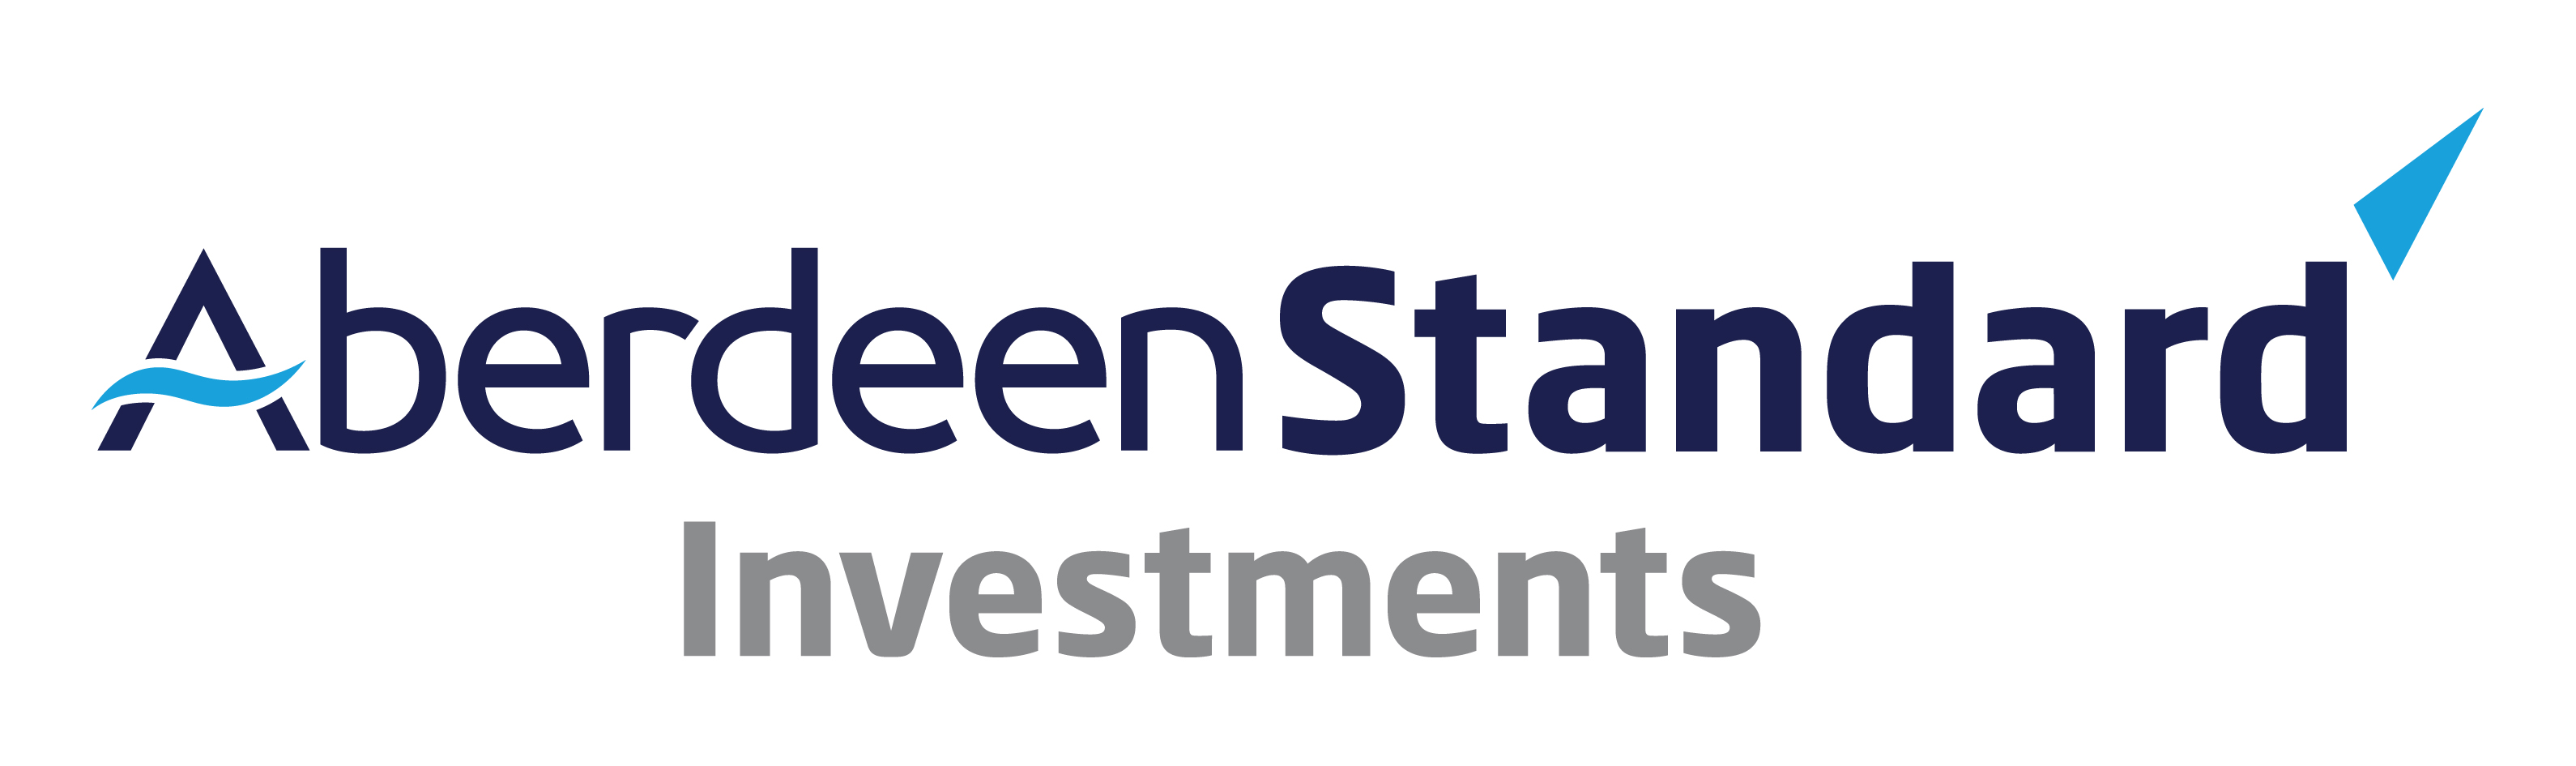 Aberdeen Standard Investments Inc., Wednesday, June 23, 2021, Press release picture